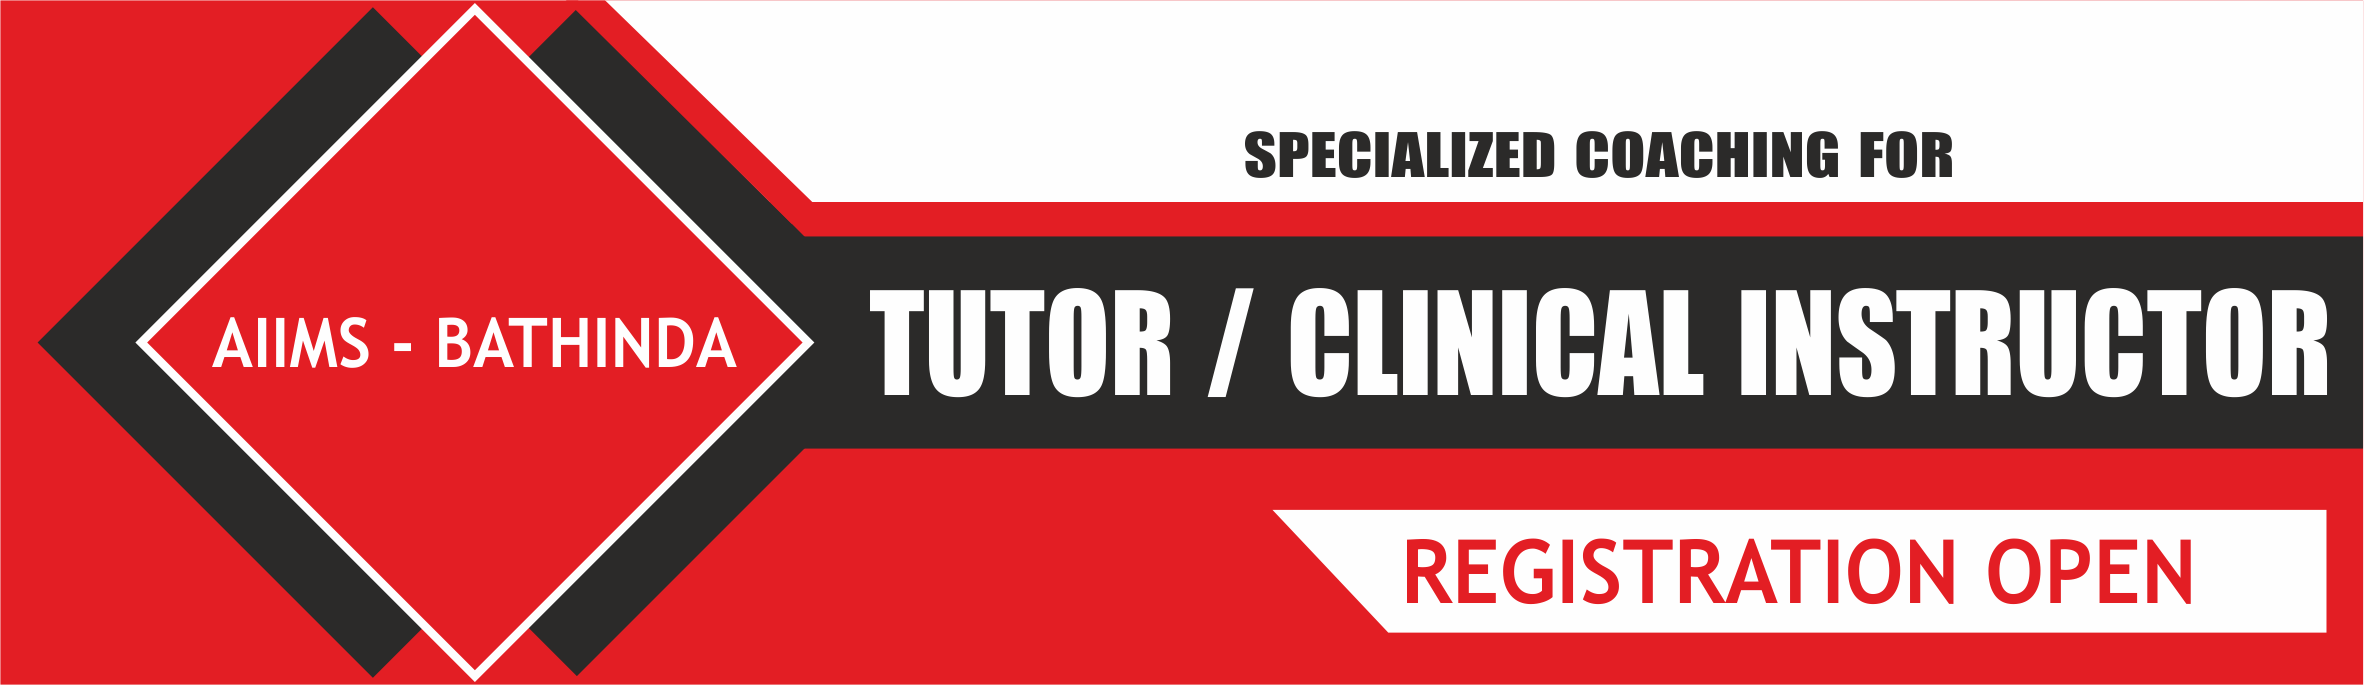 SPECIALIZED COACHING FOR TUTOR / CLINICAL INSTRUCTOR OF AIIMS - BATHINDA